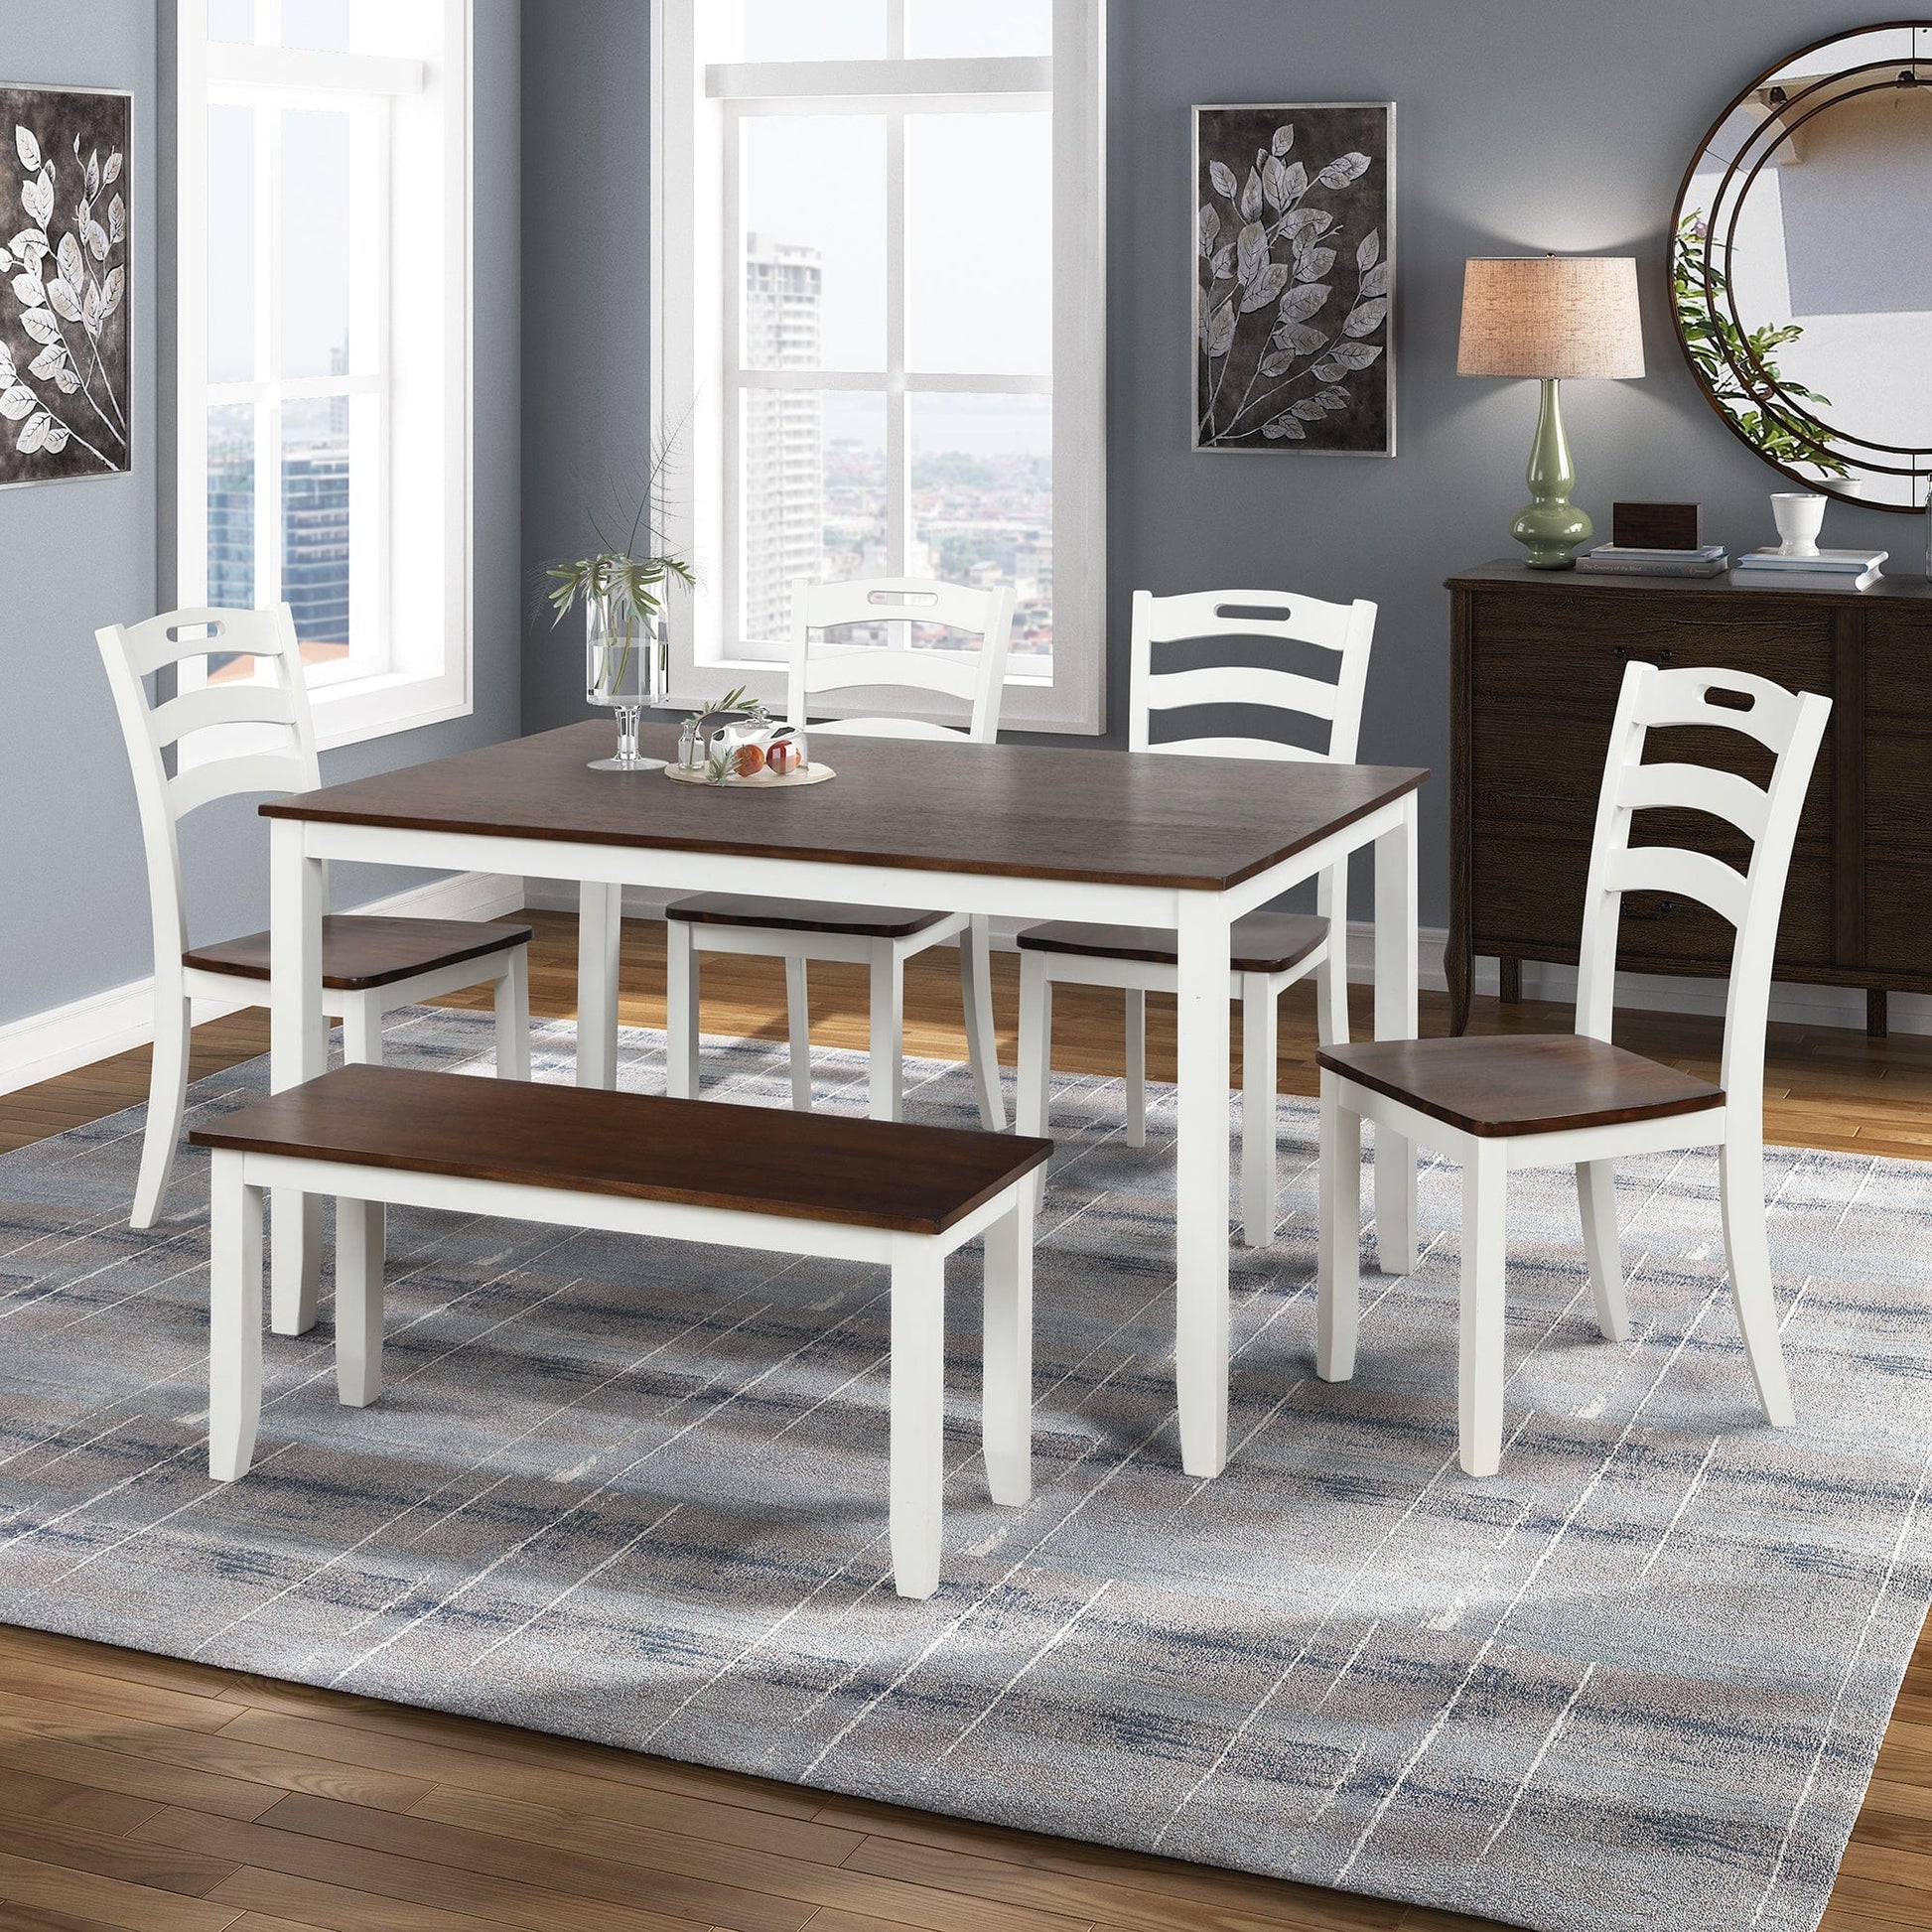 1st Choice Furniture Direct Dining Set 1st Choice Ivory & Cherry Dining Set - 6-Piece Table Set with Bench